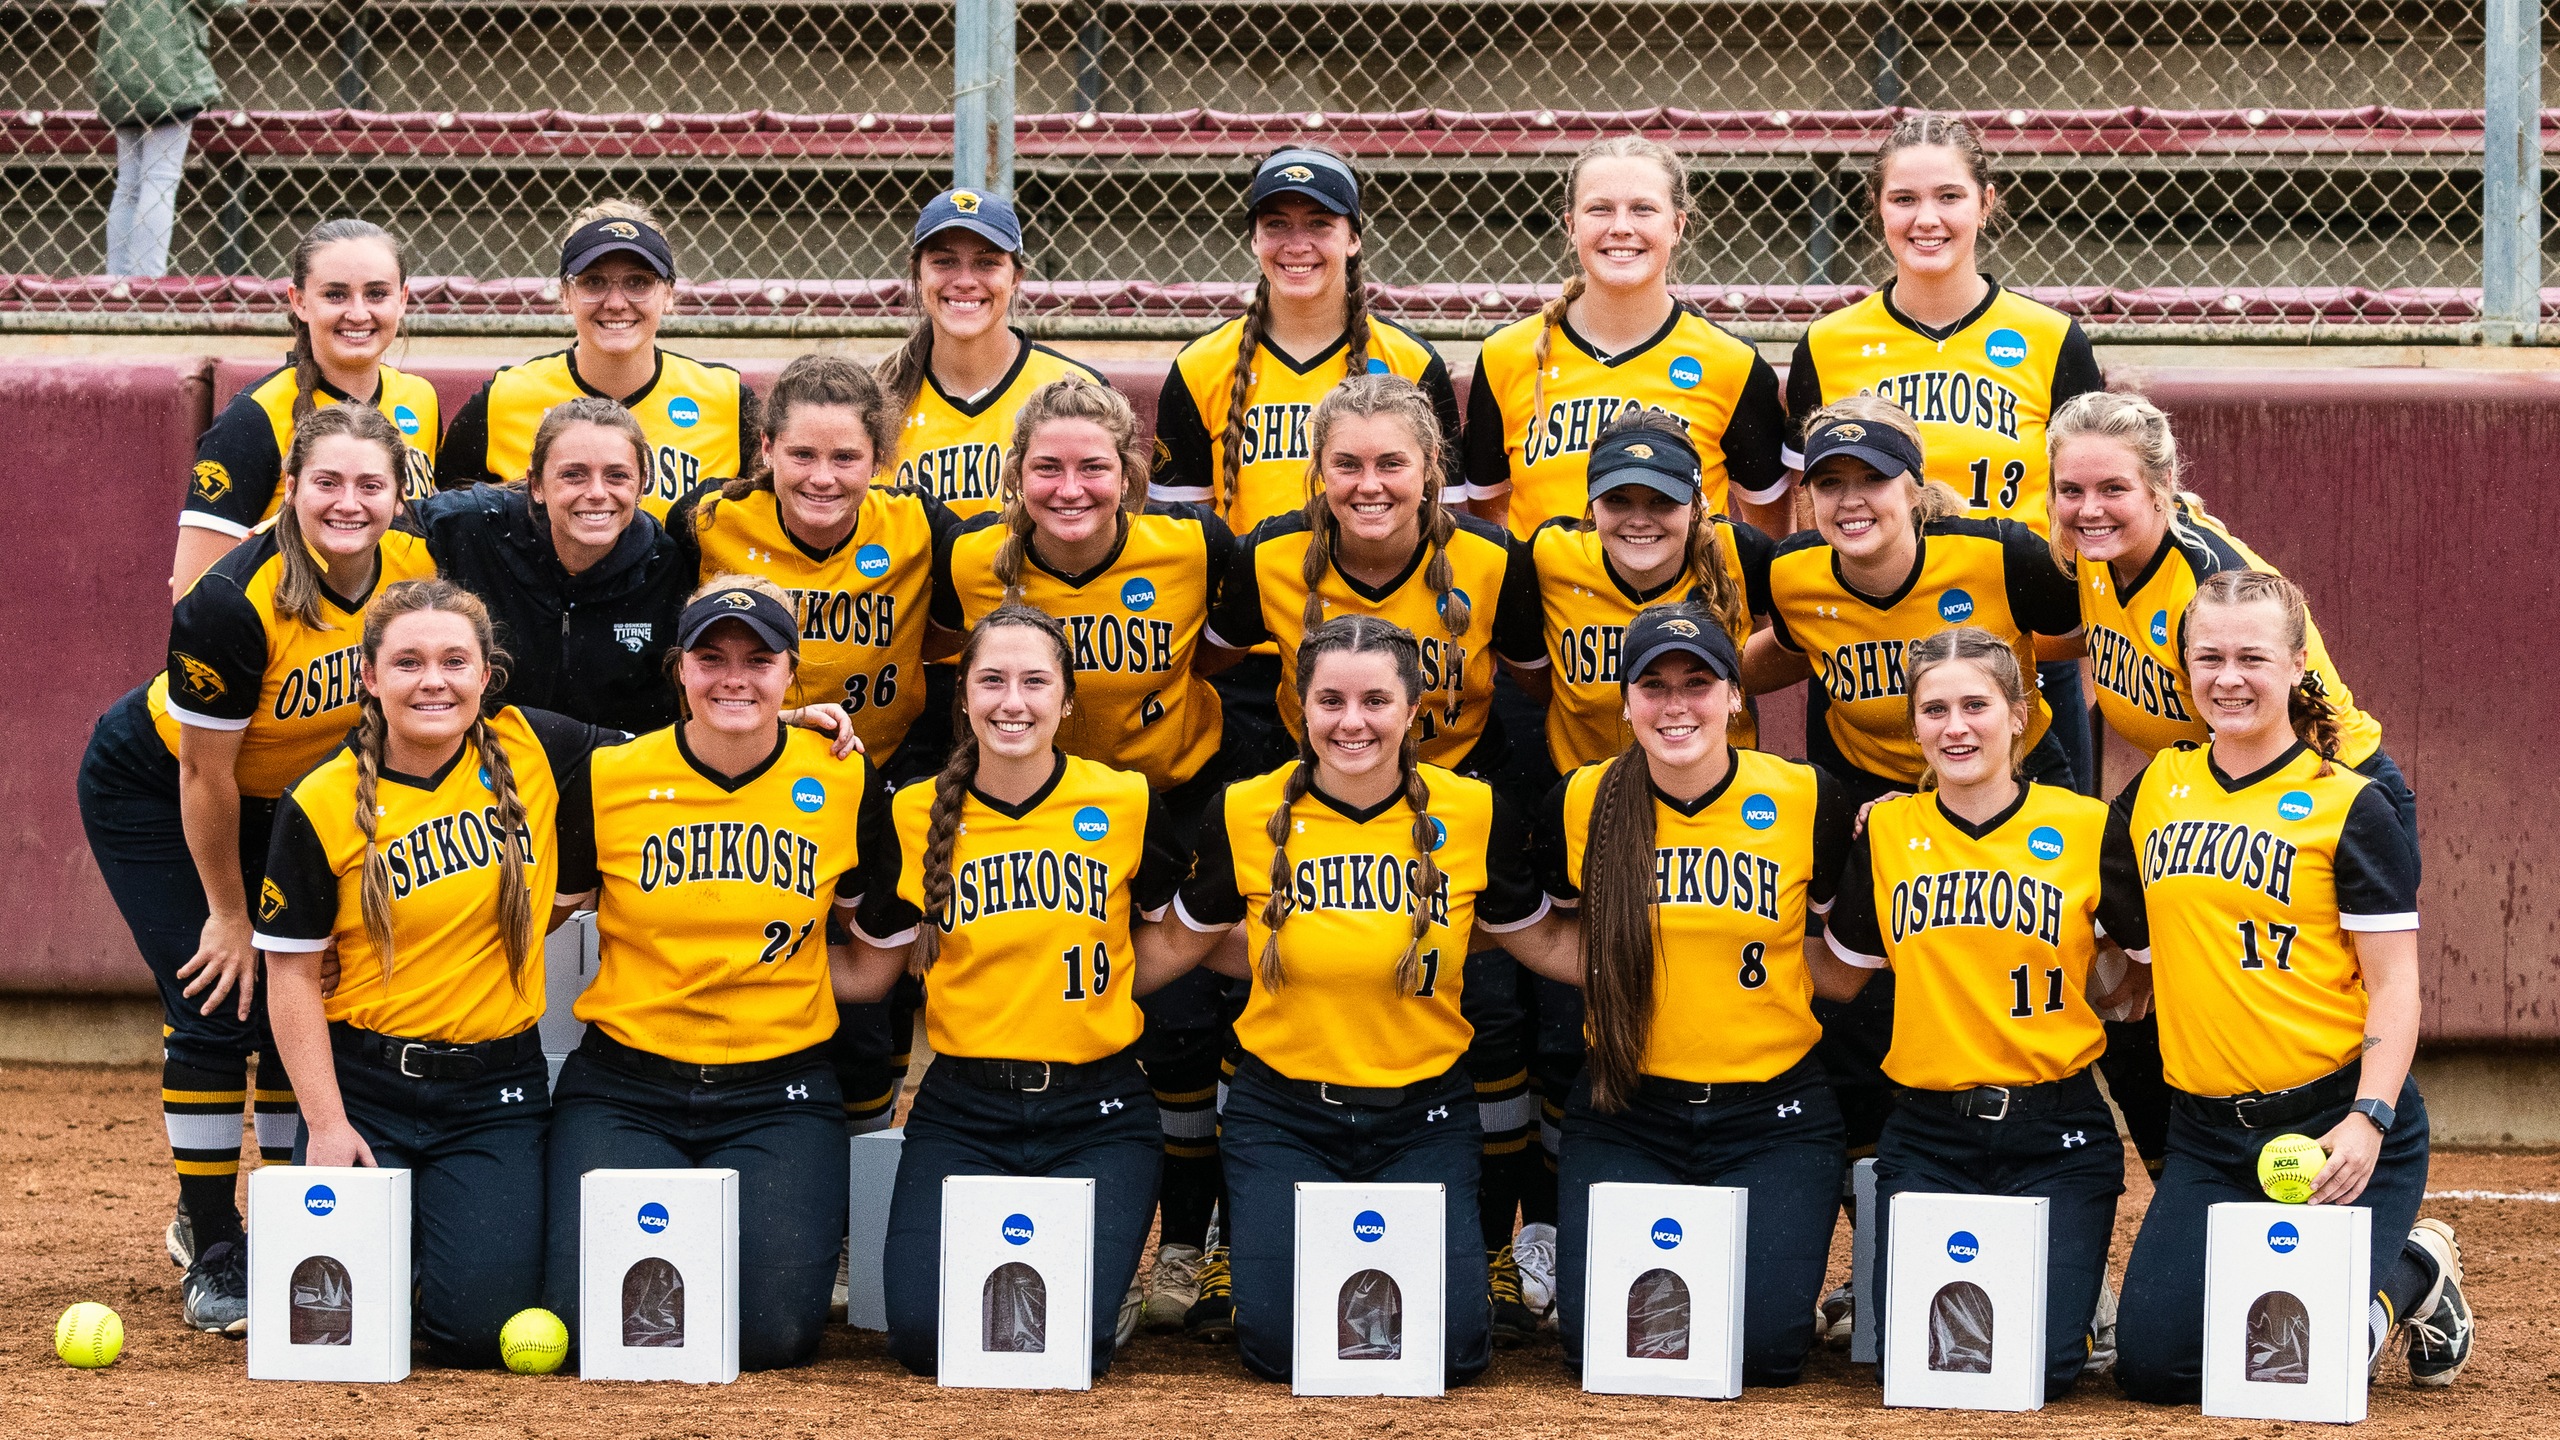 UW-Oshkosh compiled a 29-13 record and finished fifth at the NCAA Division III Championship.